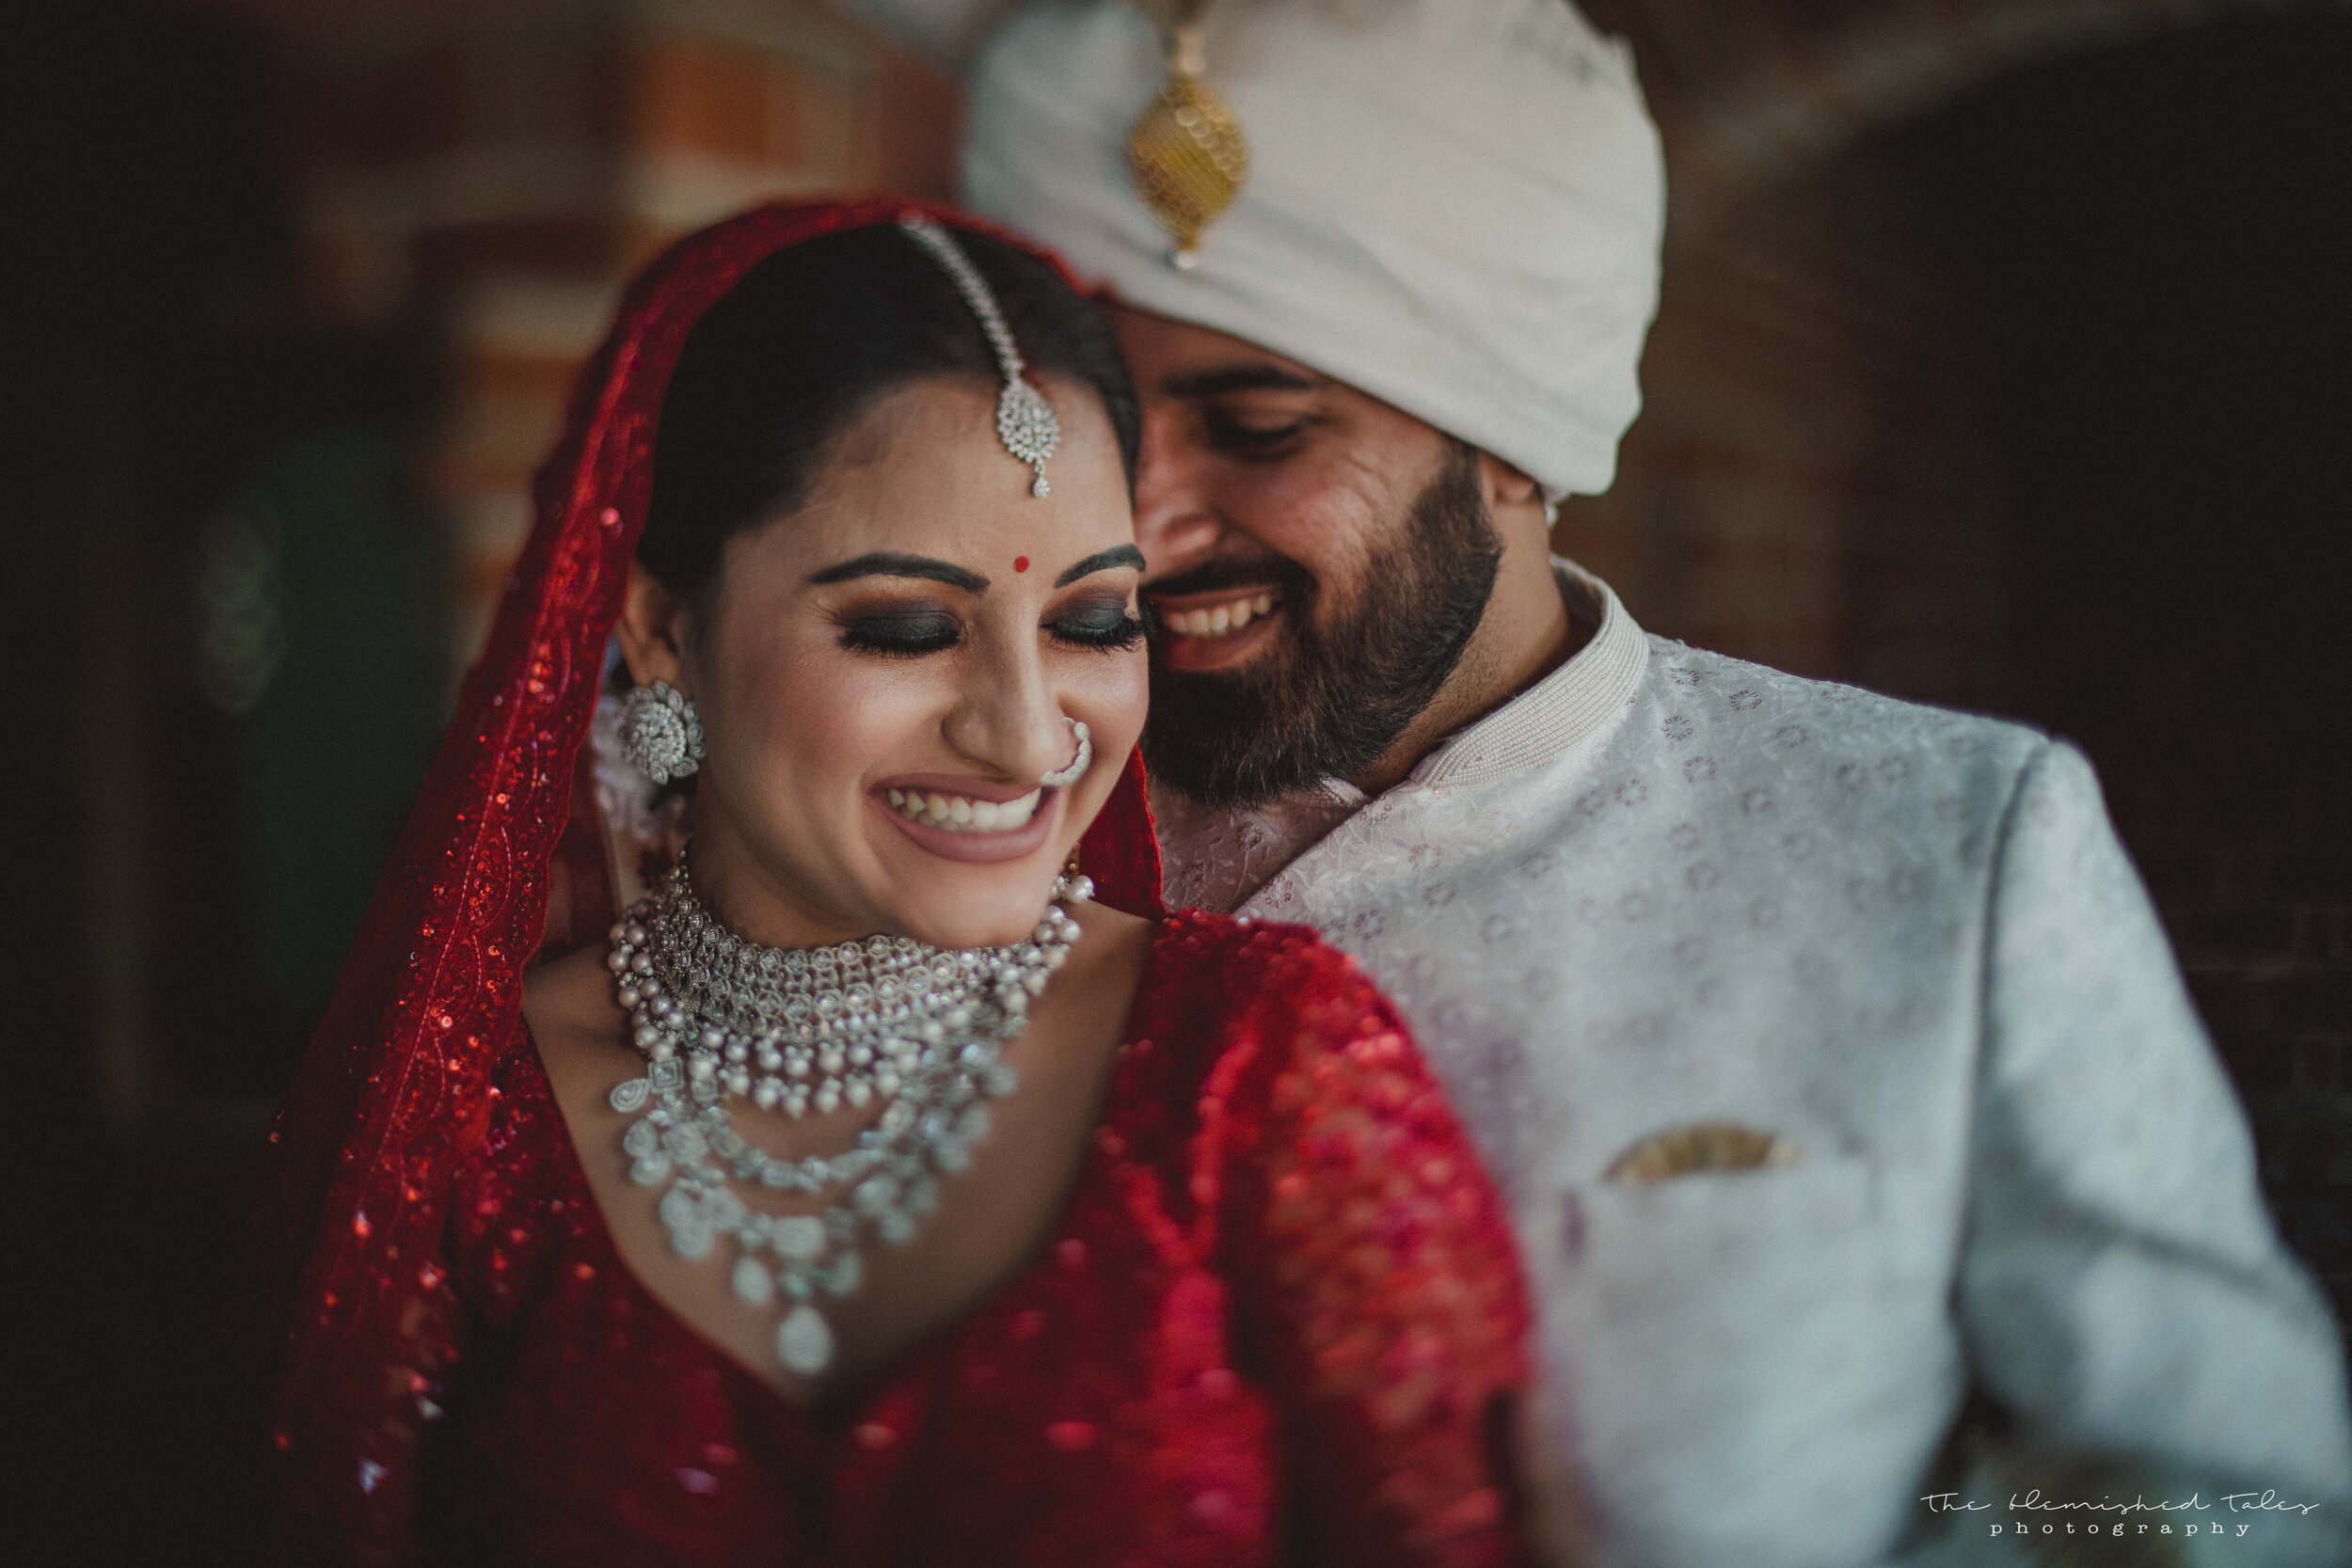 Meenakshi &amp; Dillip find some time for portraits after their wedding